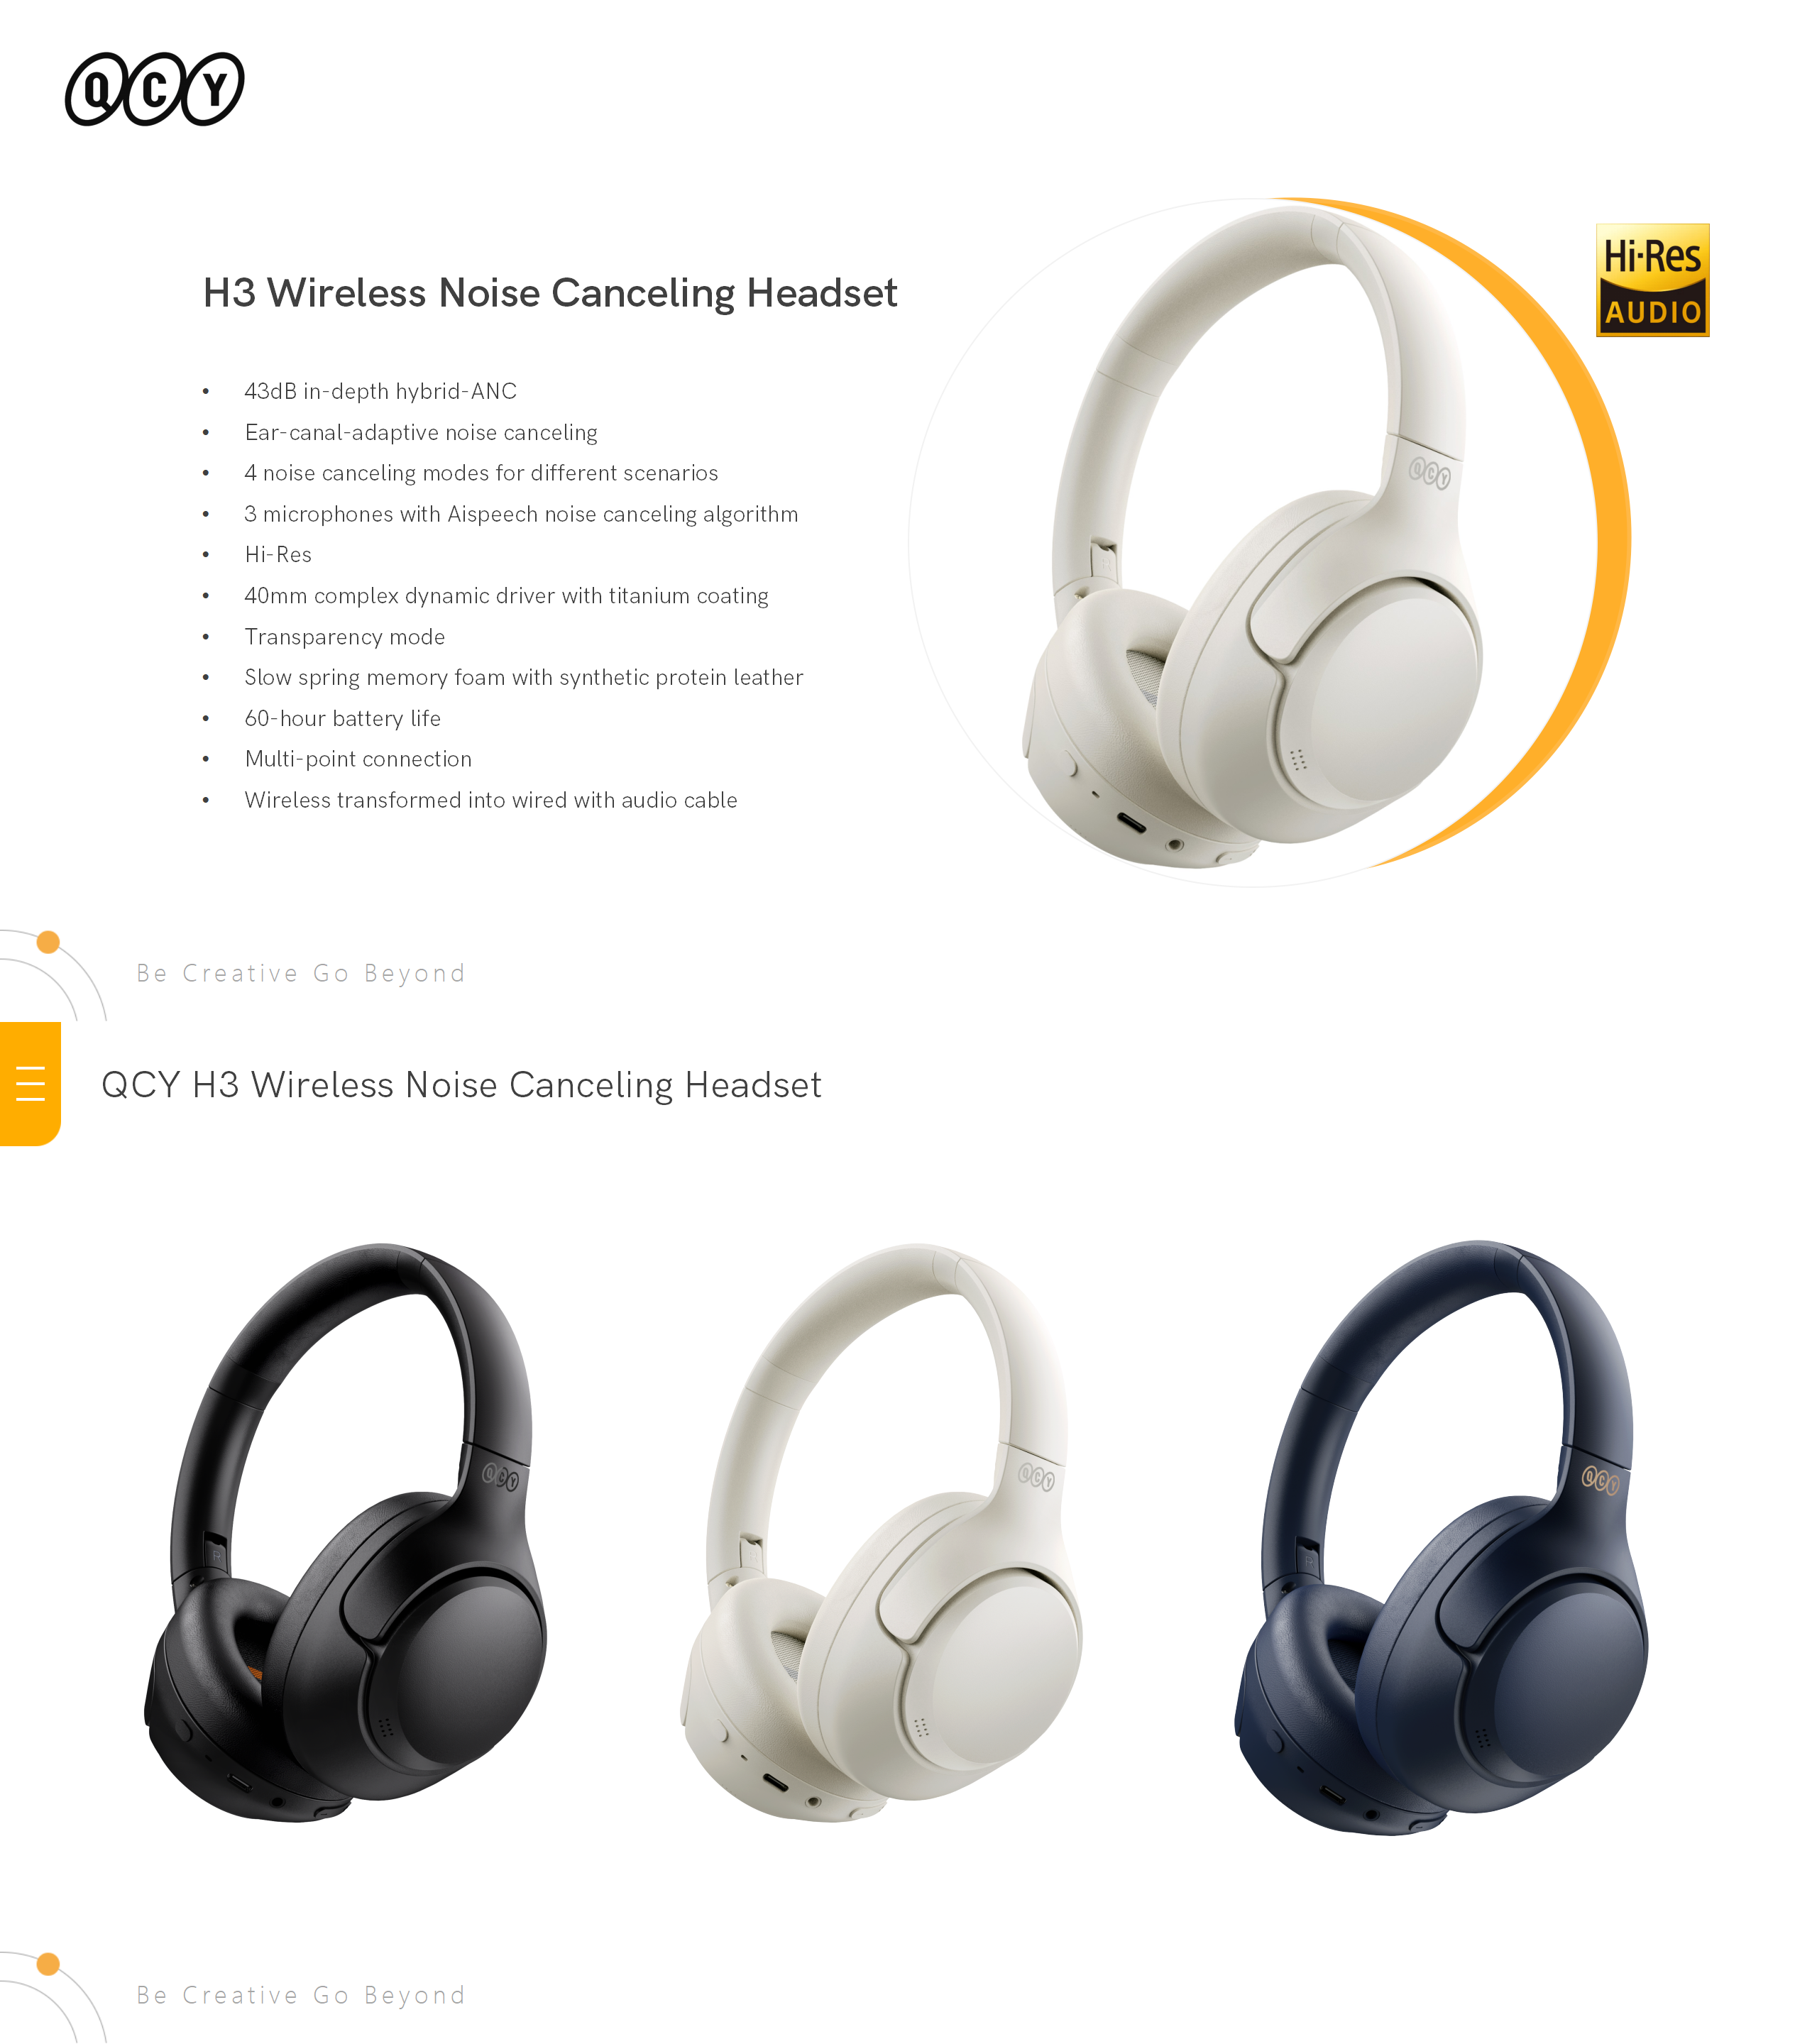 QCY H3 ANC Wireless Headphones Bluetooth 5.4 Hi-Res Audio Over Ear Headset  43dB Hybrid Active Noise Cancellation Earphones 60H